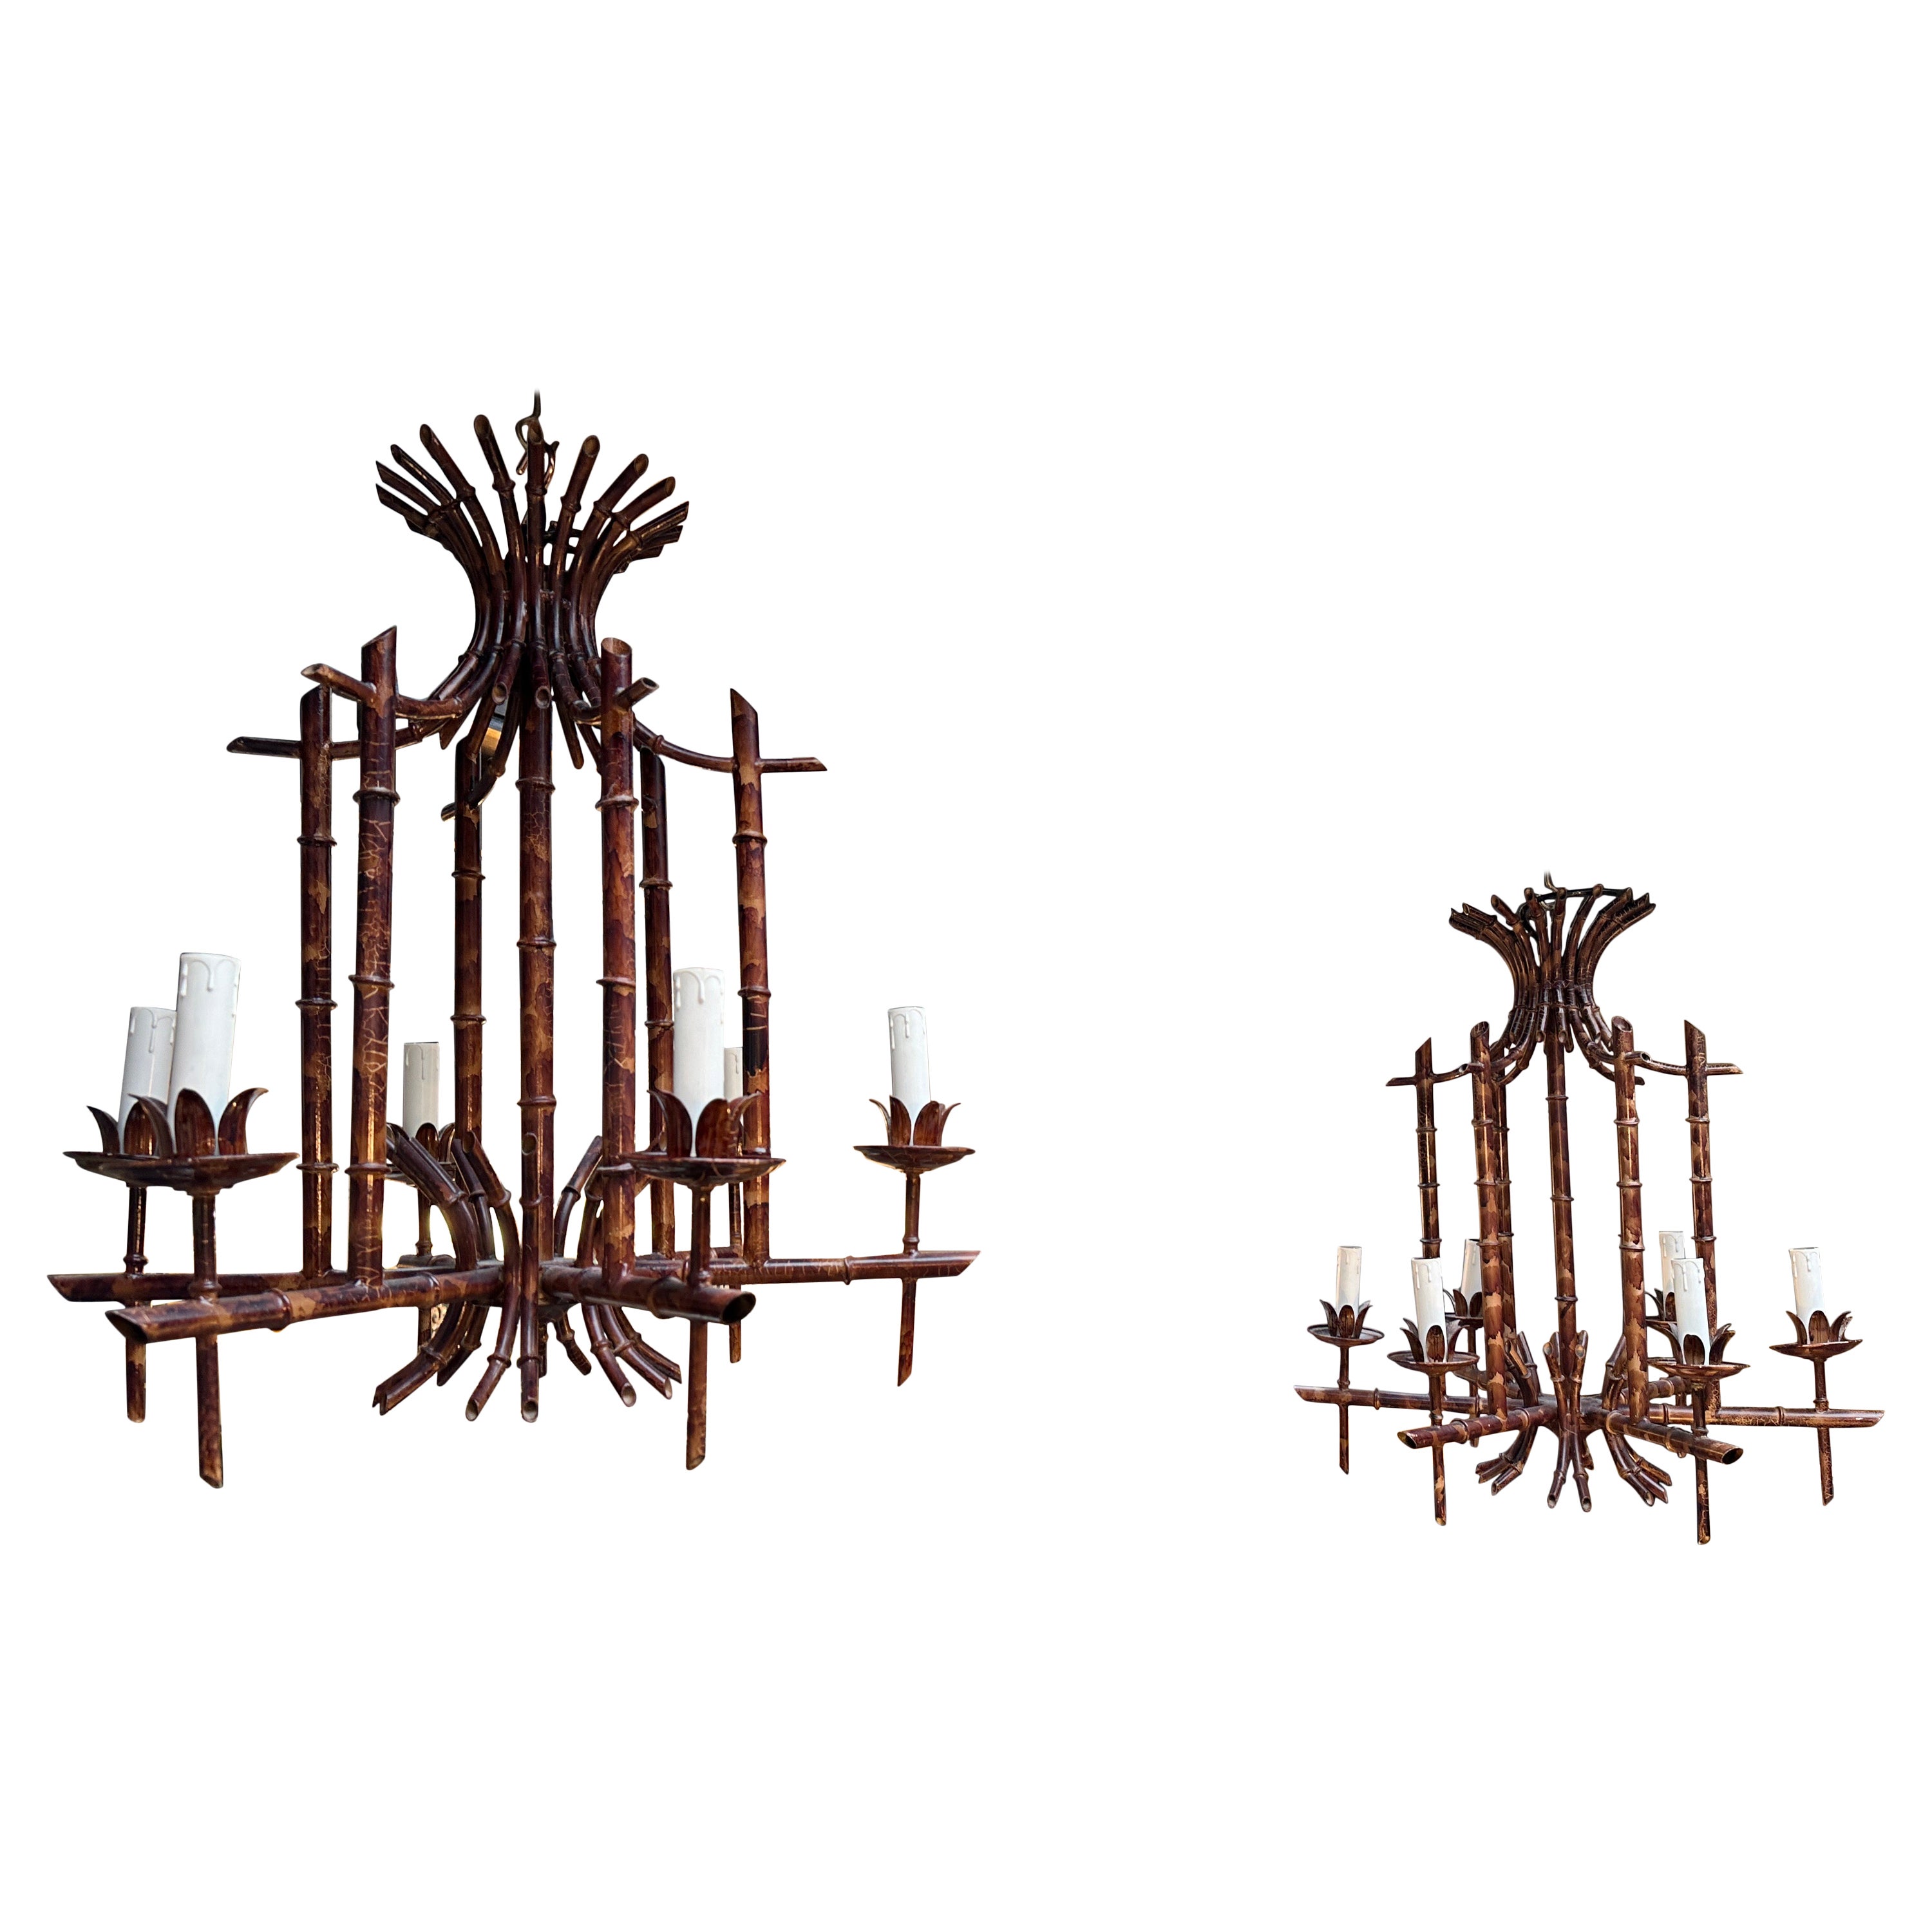 A pair of Patinated metal Italian faux bamboo style 6 arm chandeliers. Chinoiserie style lighting with coloured patinated frames, white candle holders. Very decorative and unusual 